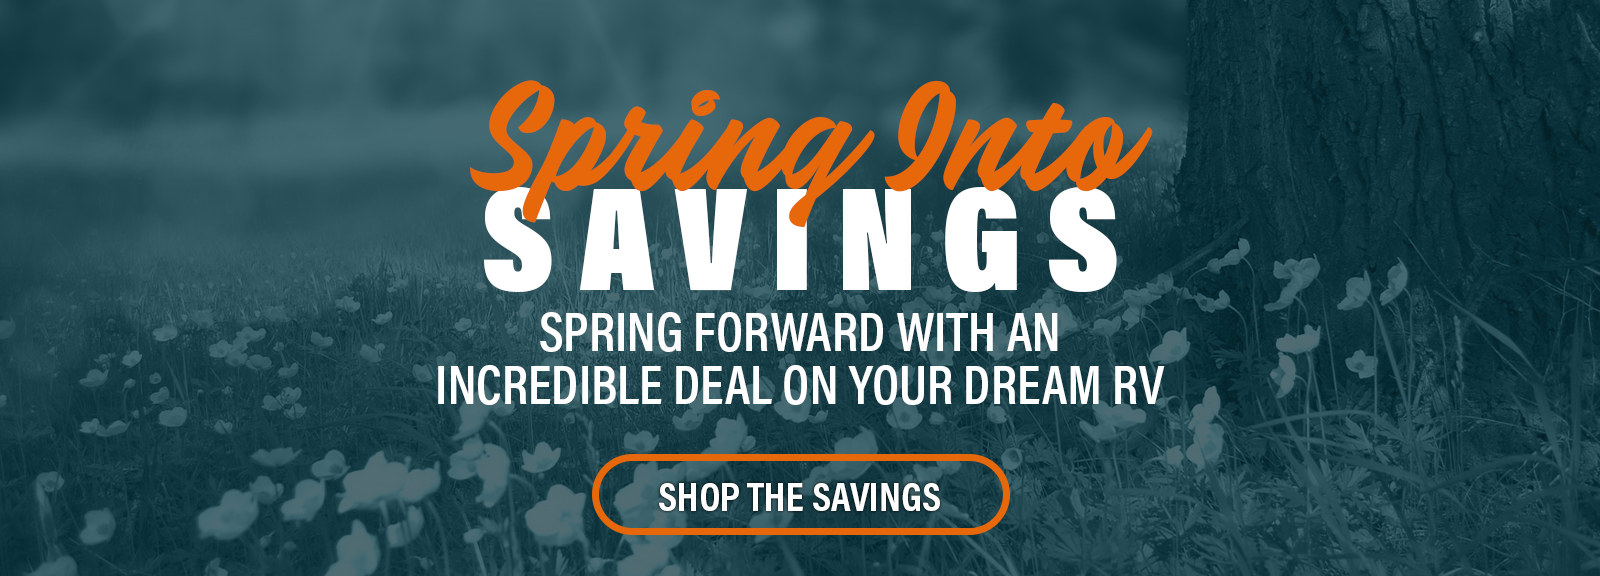 MoundView_SpringIntoSavings_Banner_022924.png